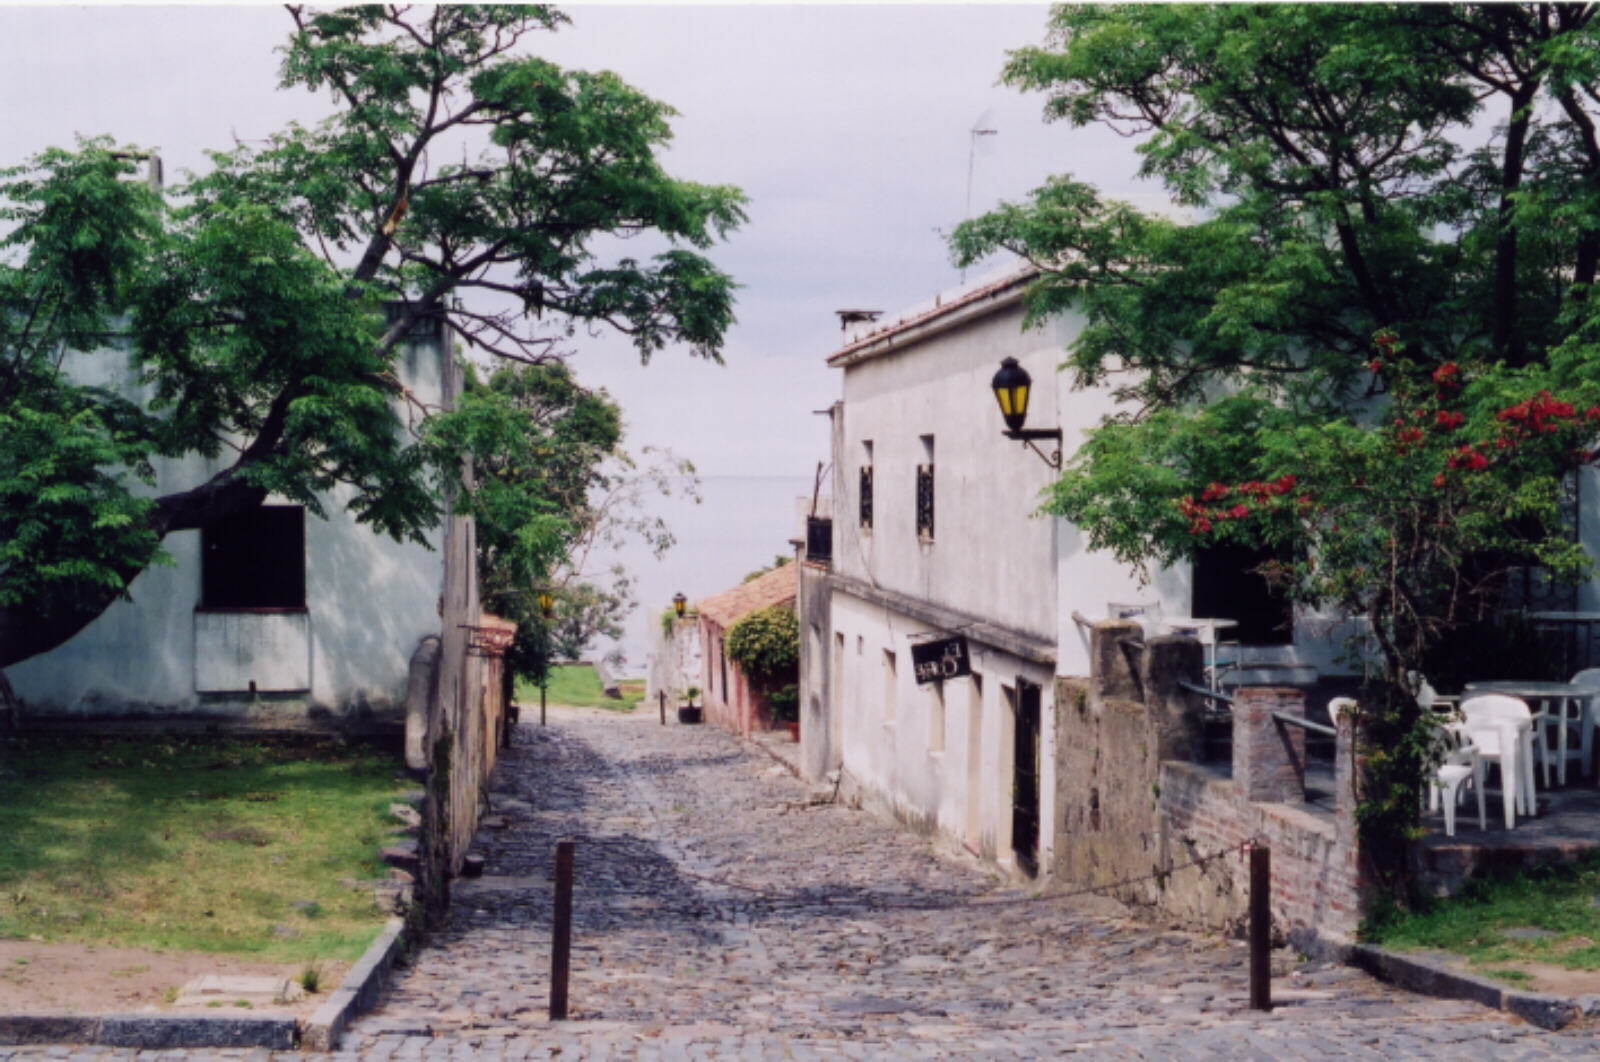 Suspiros Street and the river Plate, Colonia, Uruguay